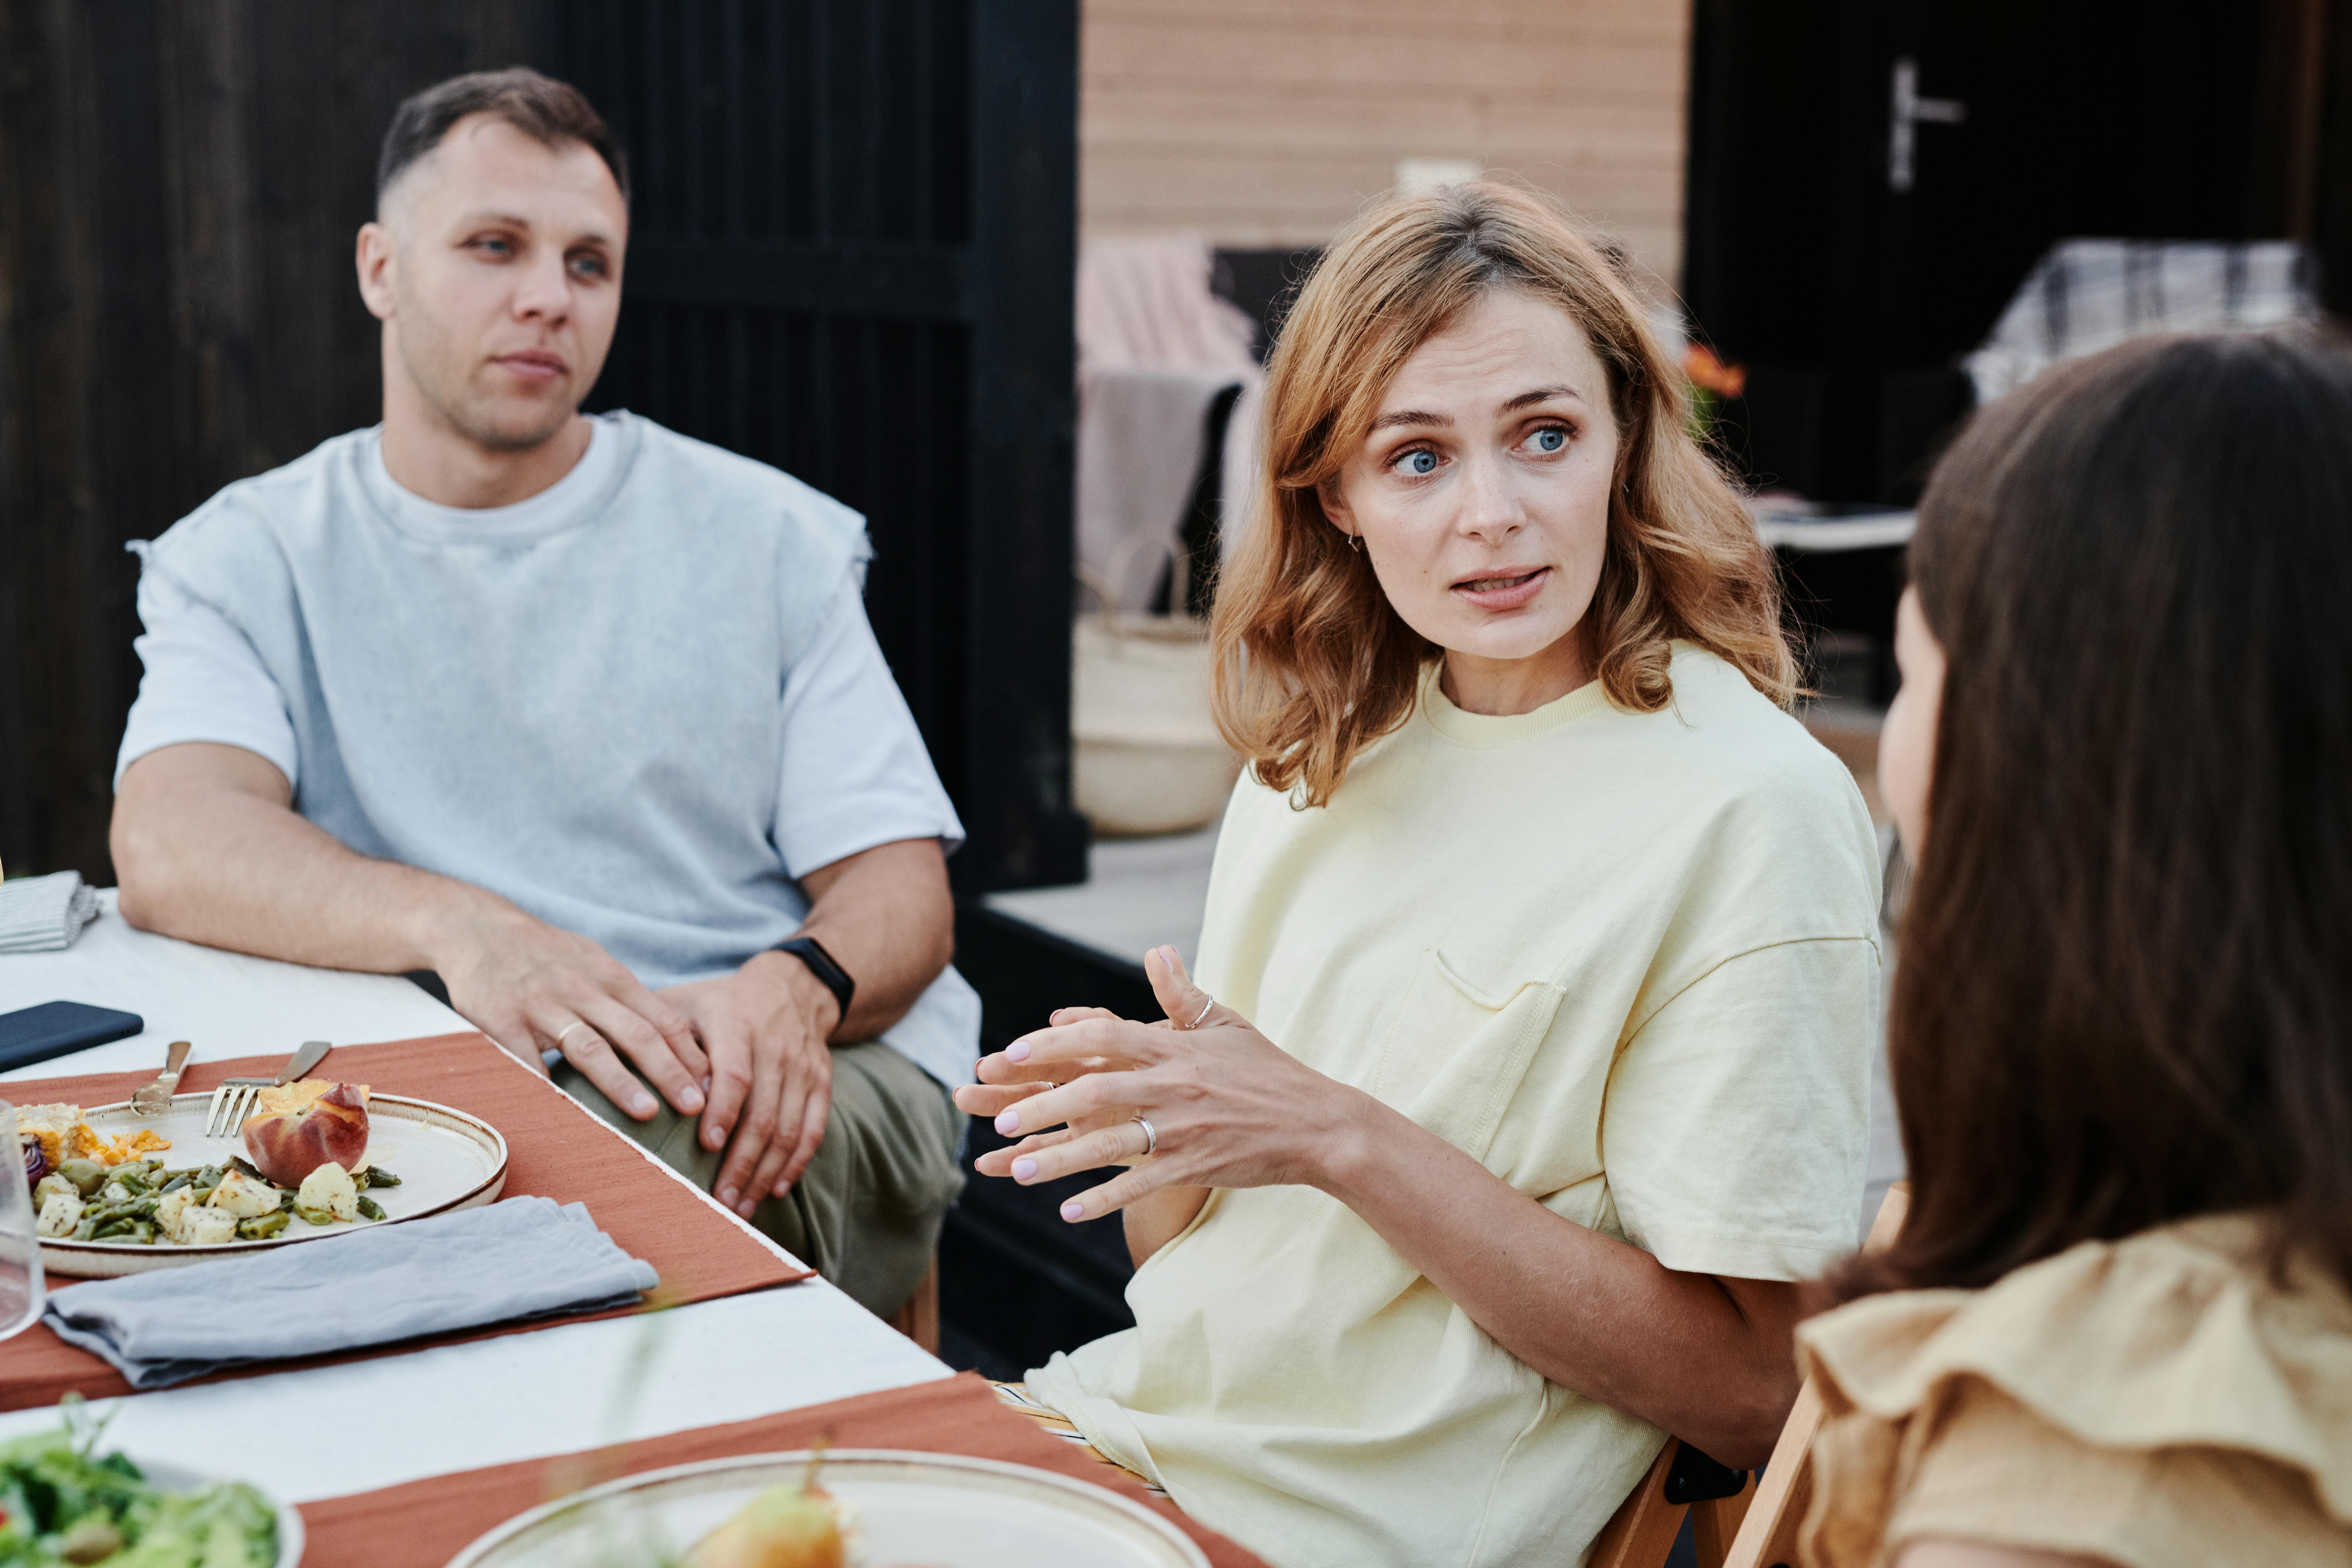 A man and two women talking at a table | Source: Pexels